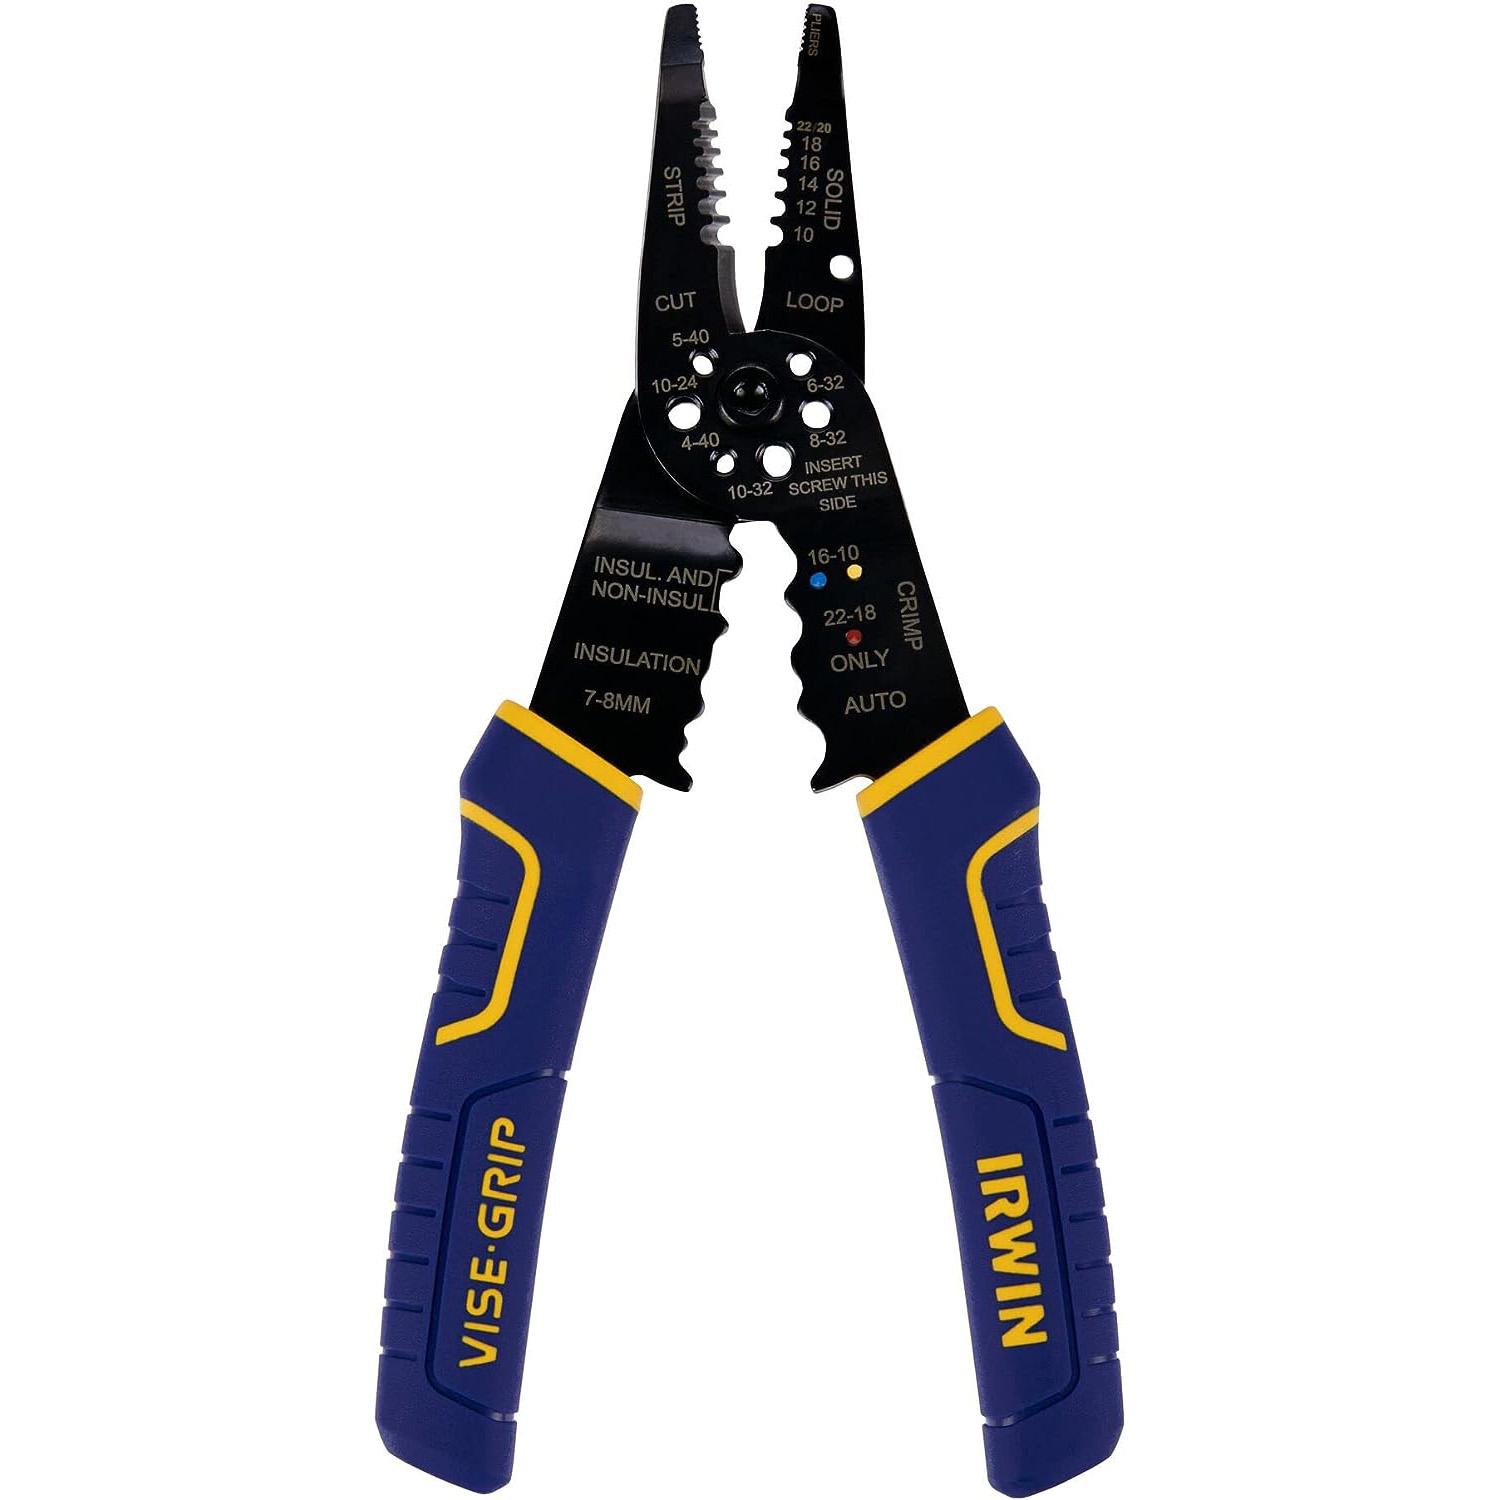 Irwin Vise Grip Wire Stripping Tool Wire Cutter for $10.99